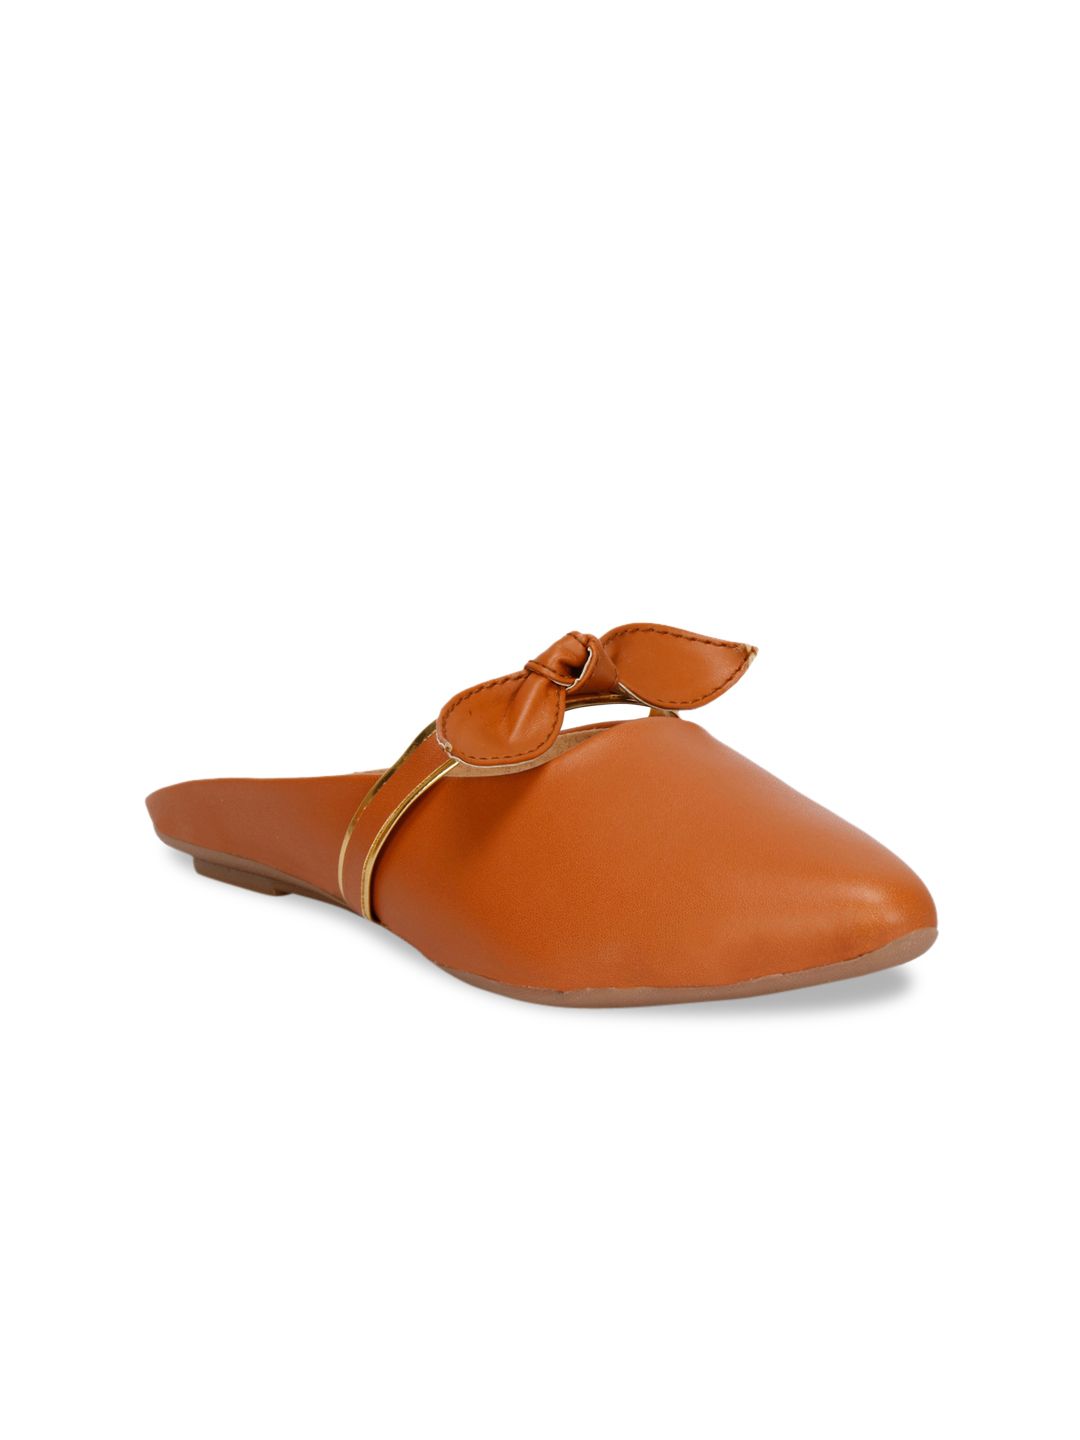 Denill Women Tan Ballerinas with Bows Flats Price in India